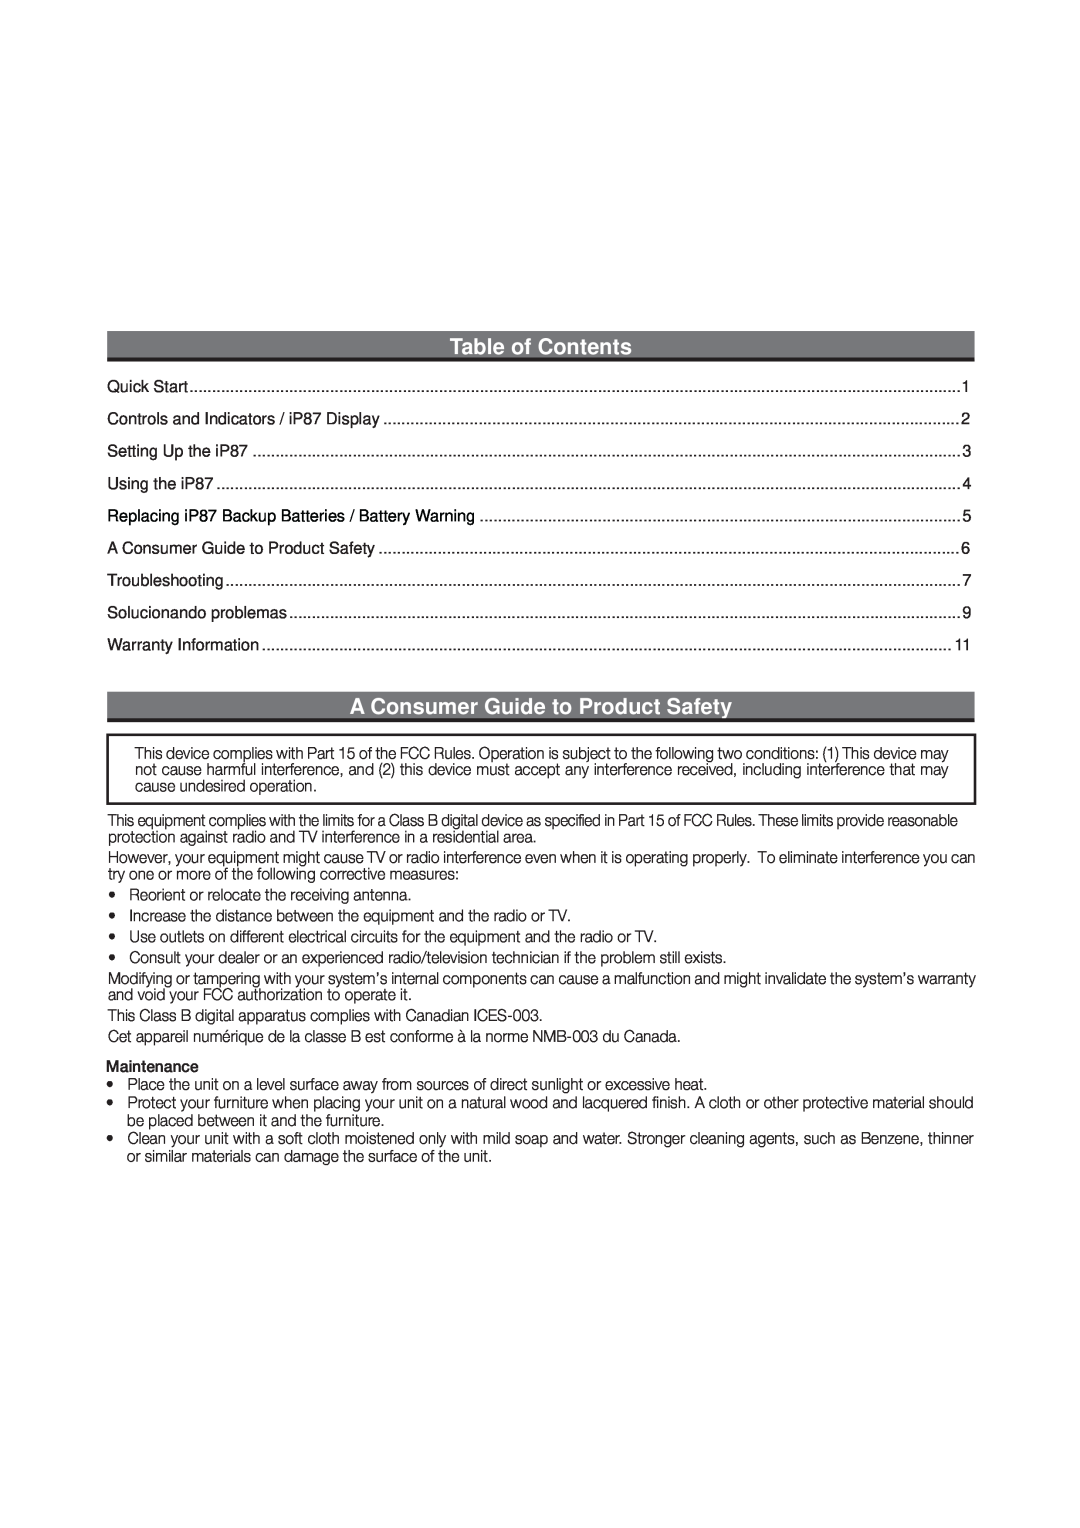 iHome IP87 manual Table of Contents, A Consumer Guide to Product Safety 